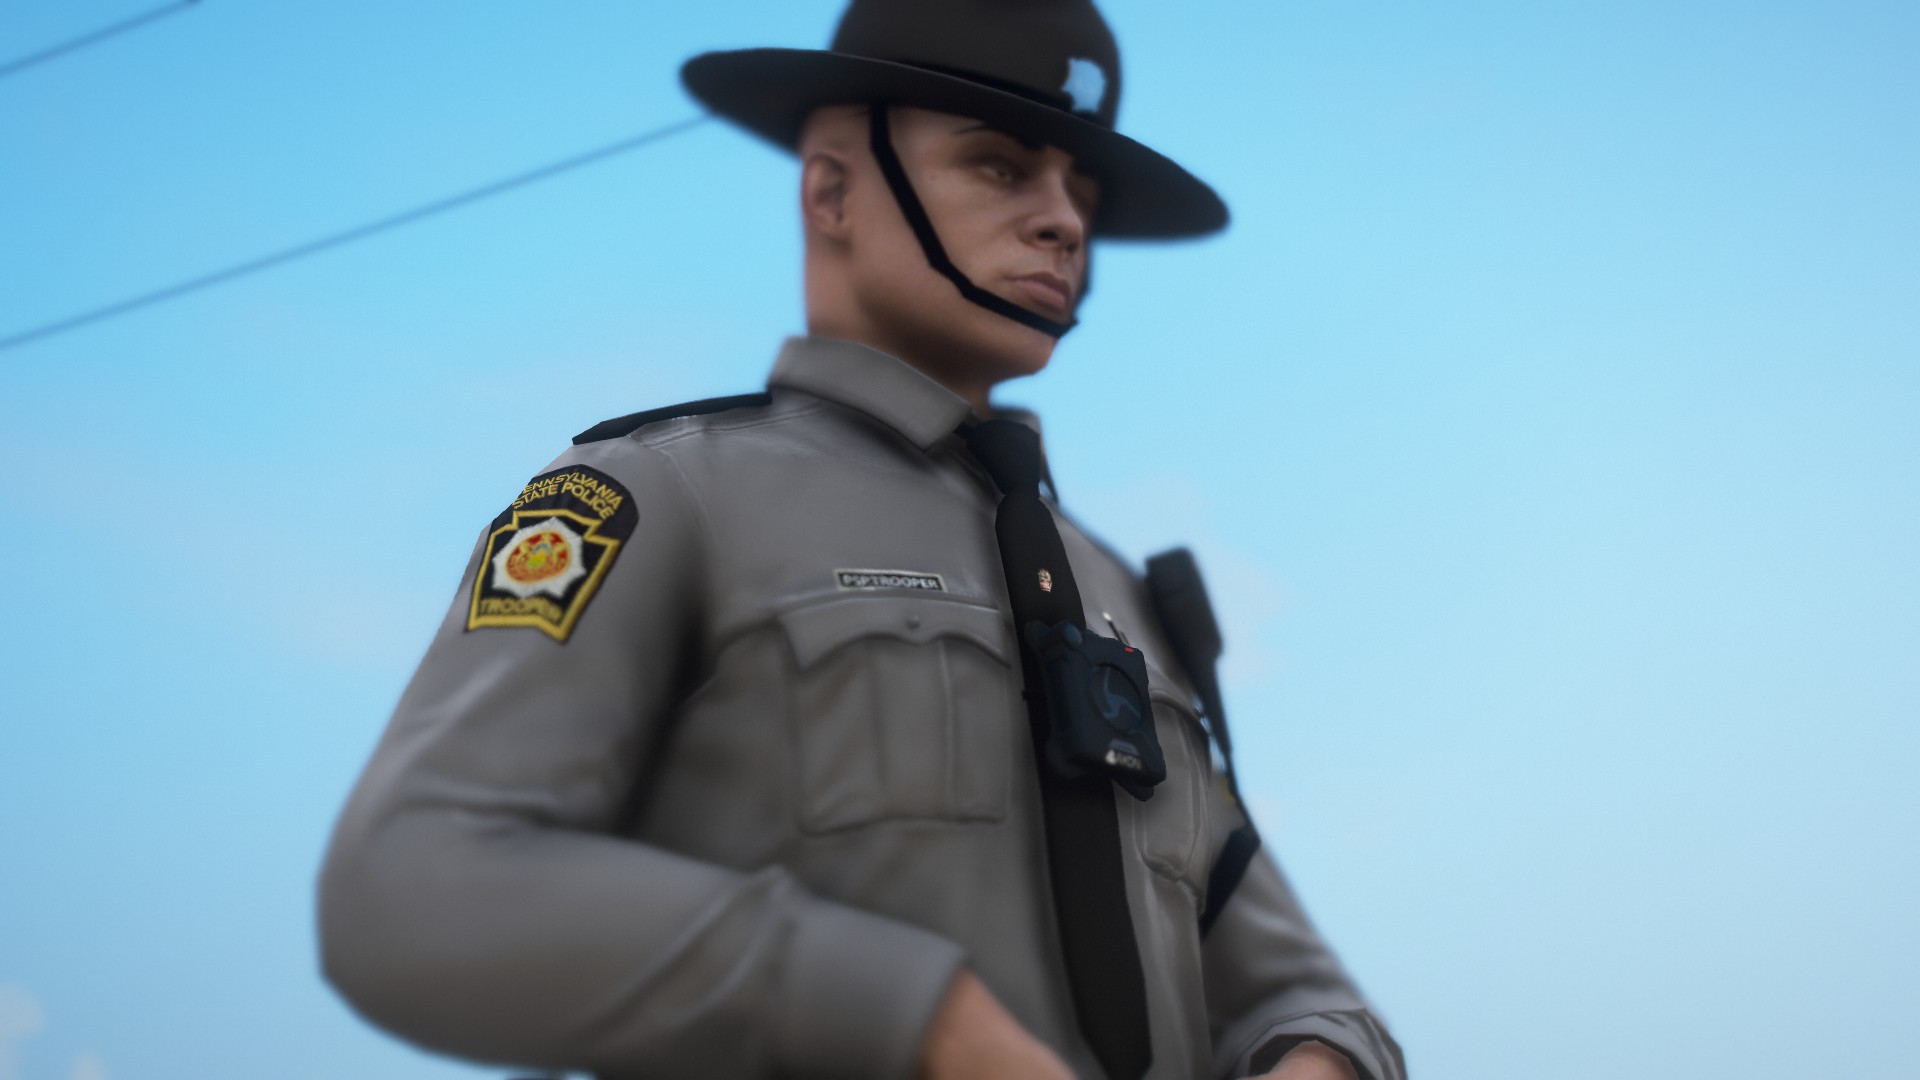 More information about "[FIVEM READY] Pennsilvaina State Trooper E.U.P 9.3"